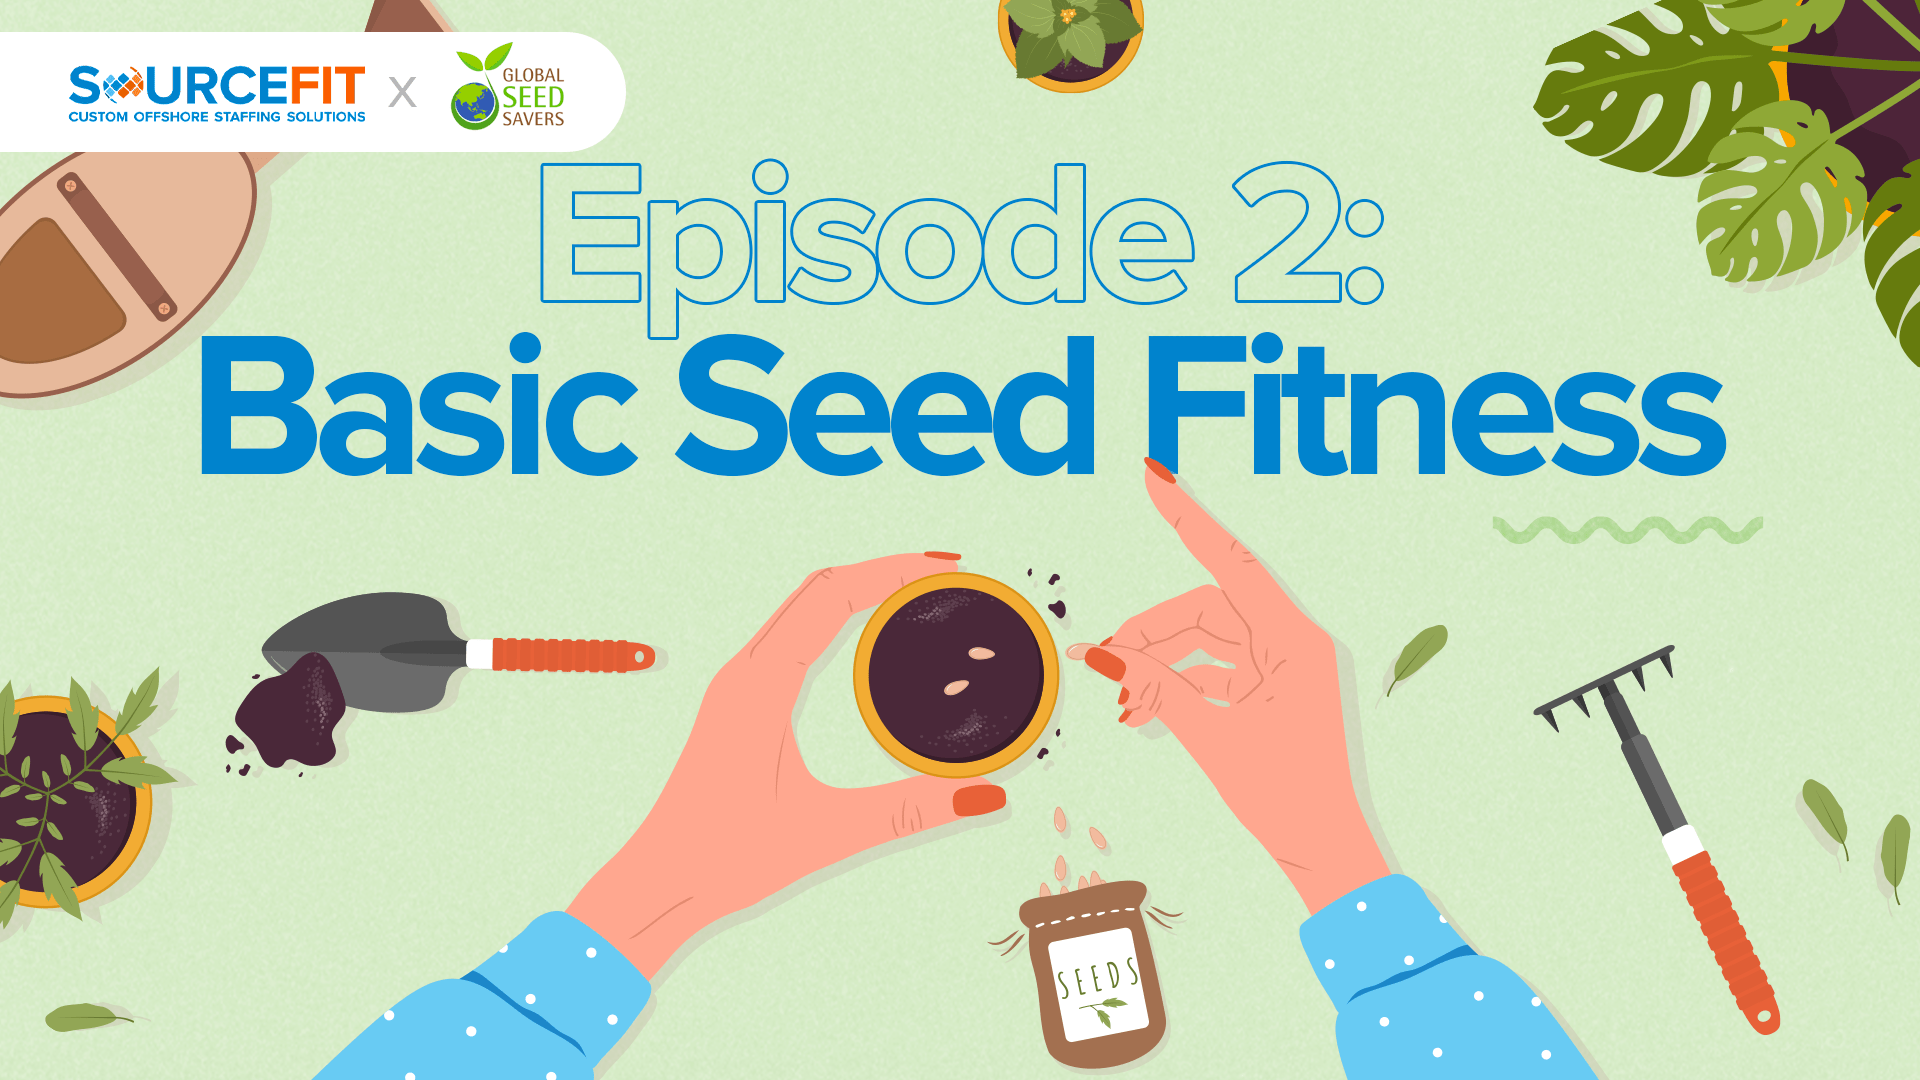 hands taking care of seeds with text 'Episode 2: Basic Seed Fitness'